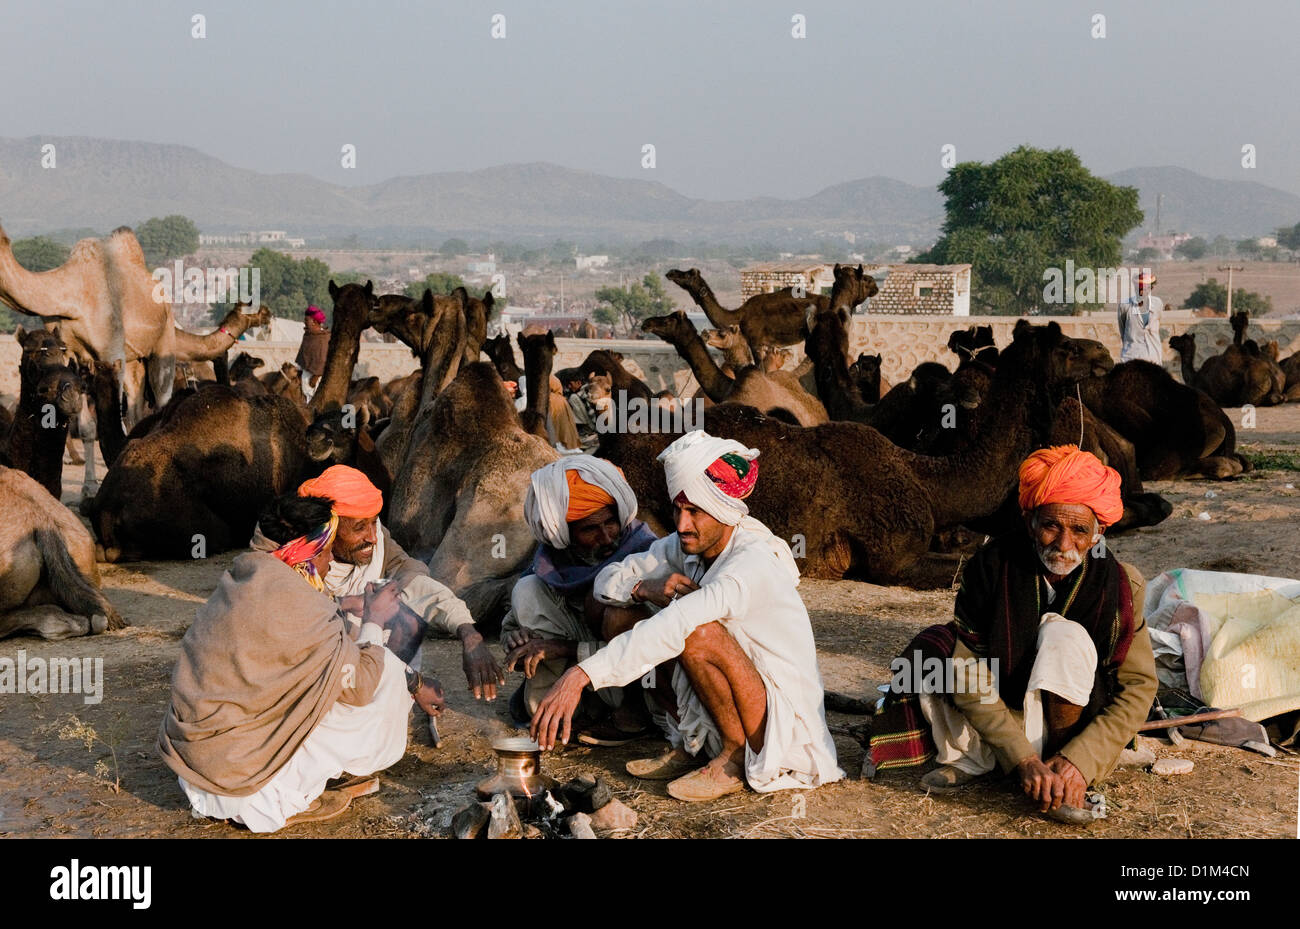 Camel traders sit on the ground watching their camels and talking at the annual camel fair in Pushkar Rajasthan India Stock Photo